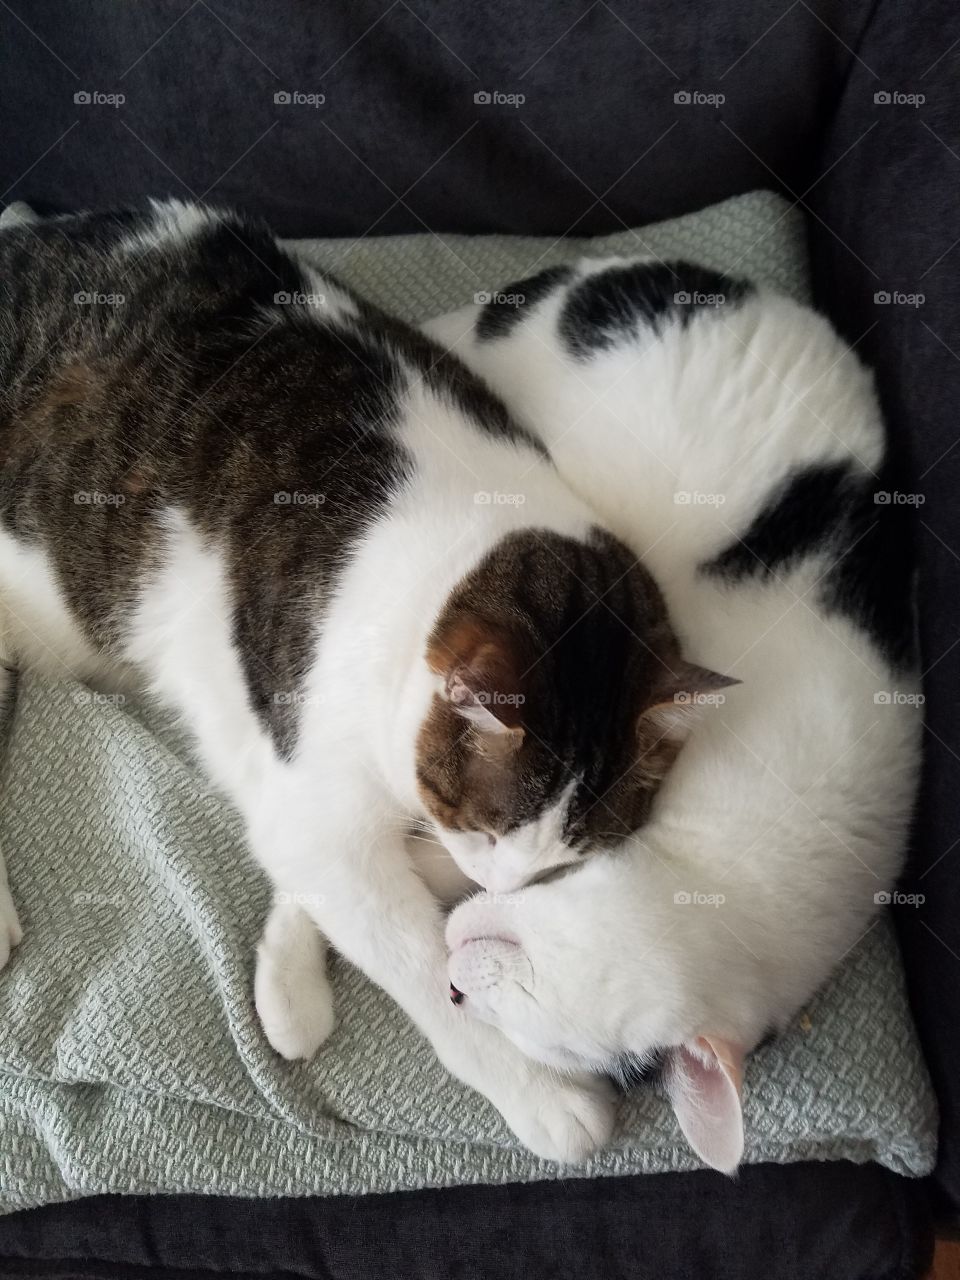 Cats snuggling with each other